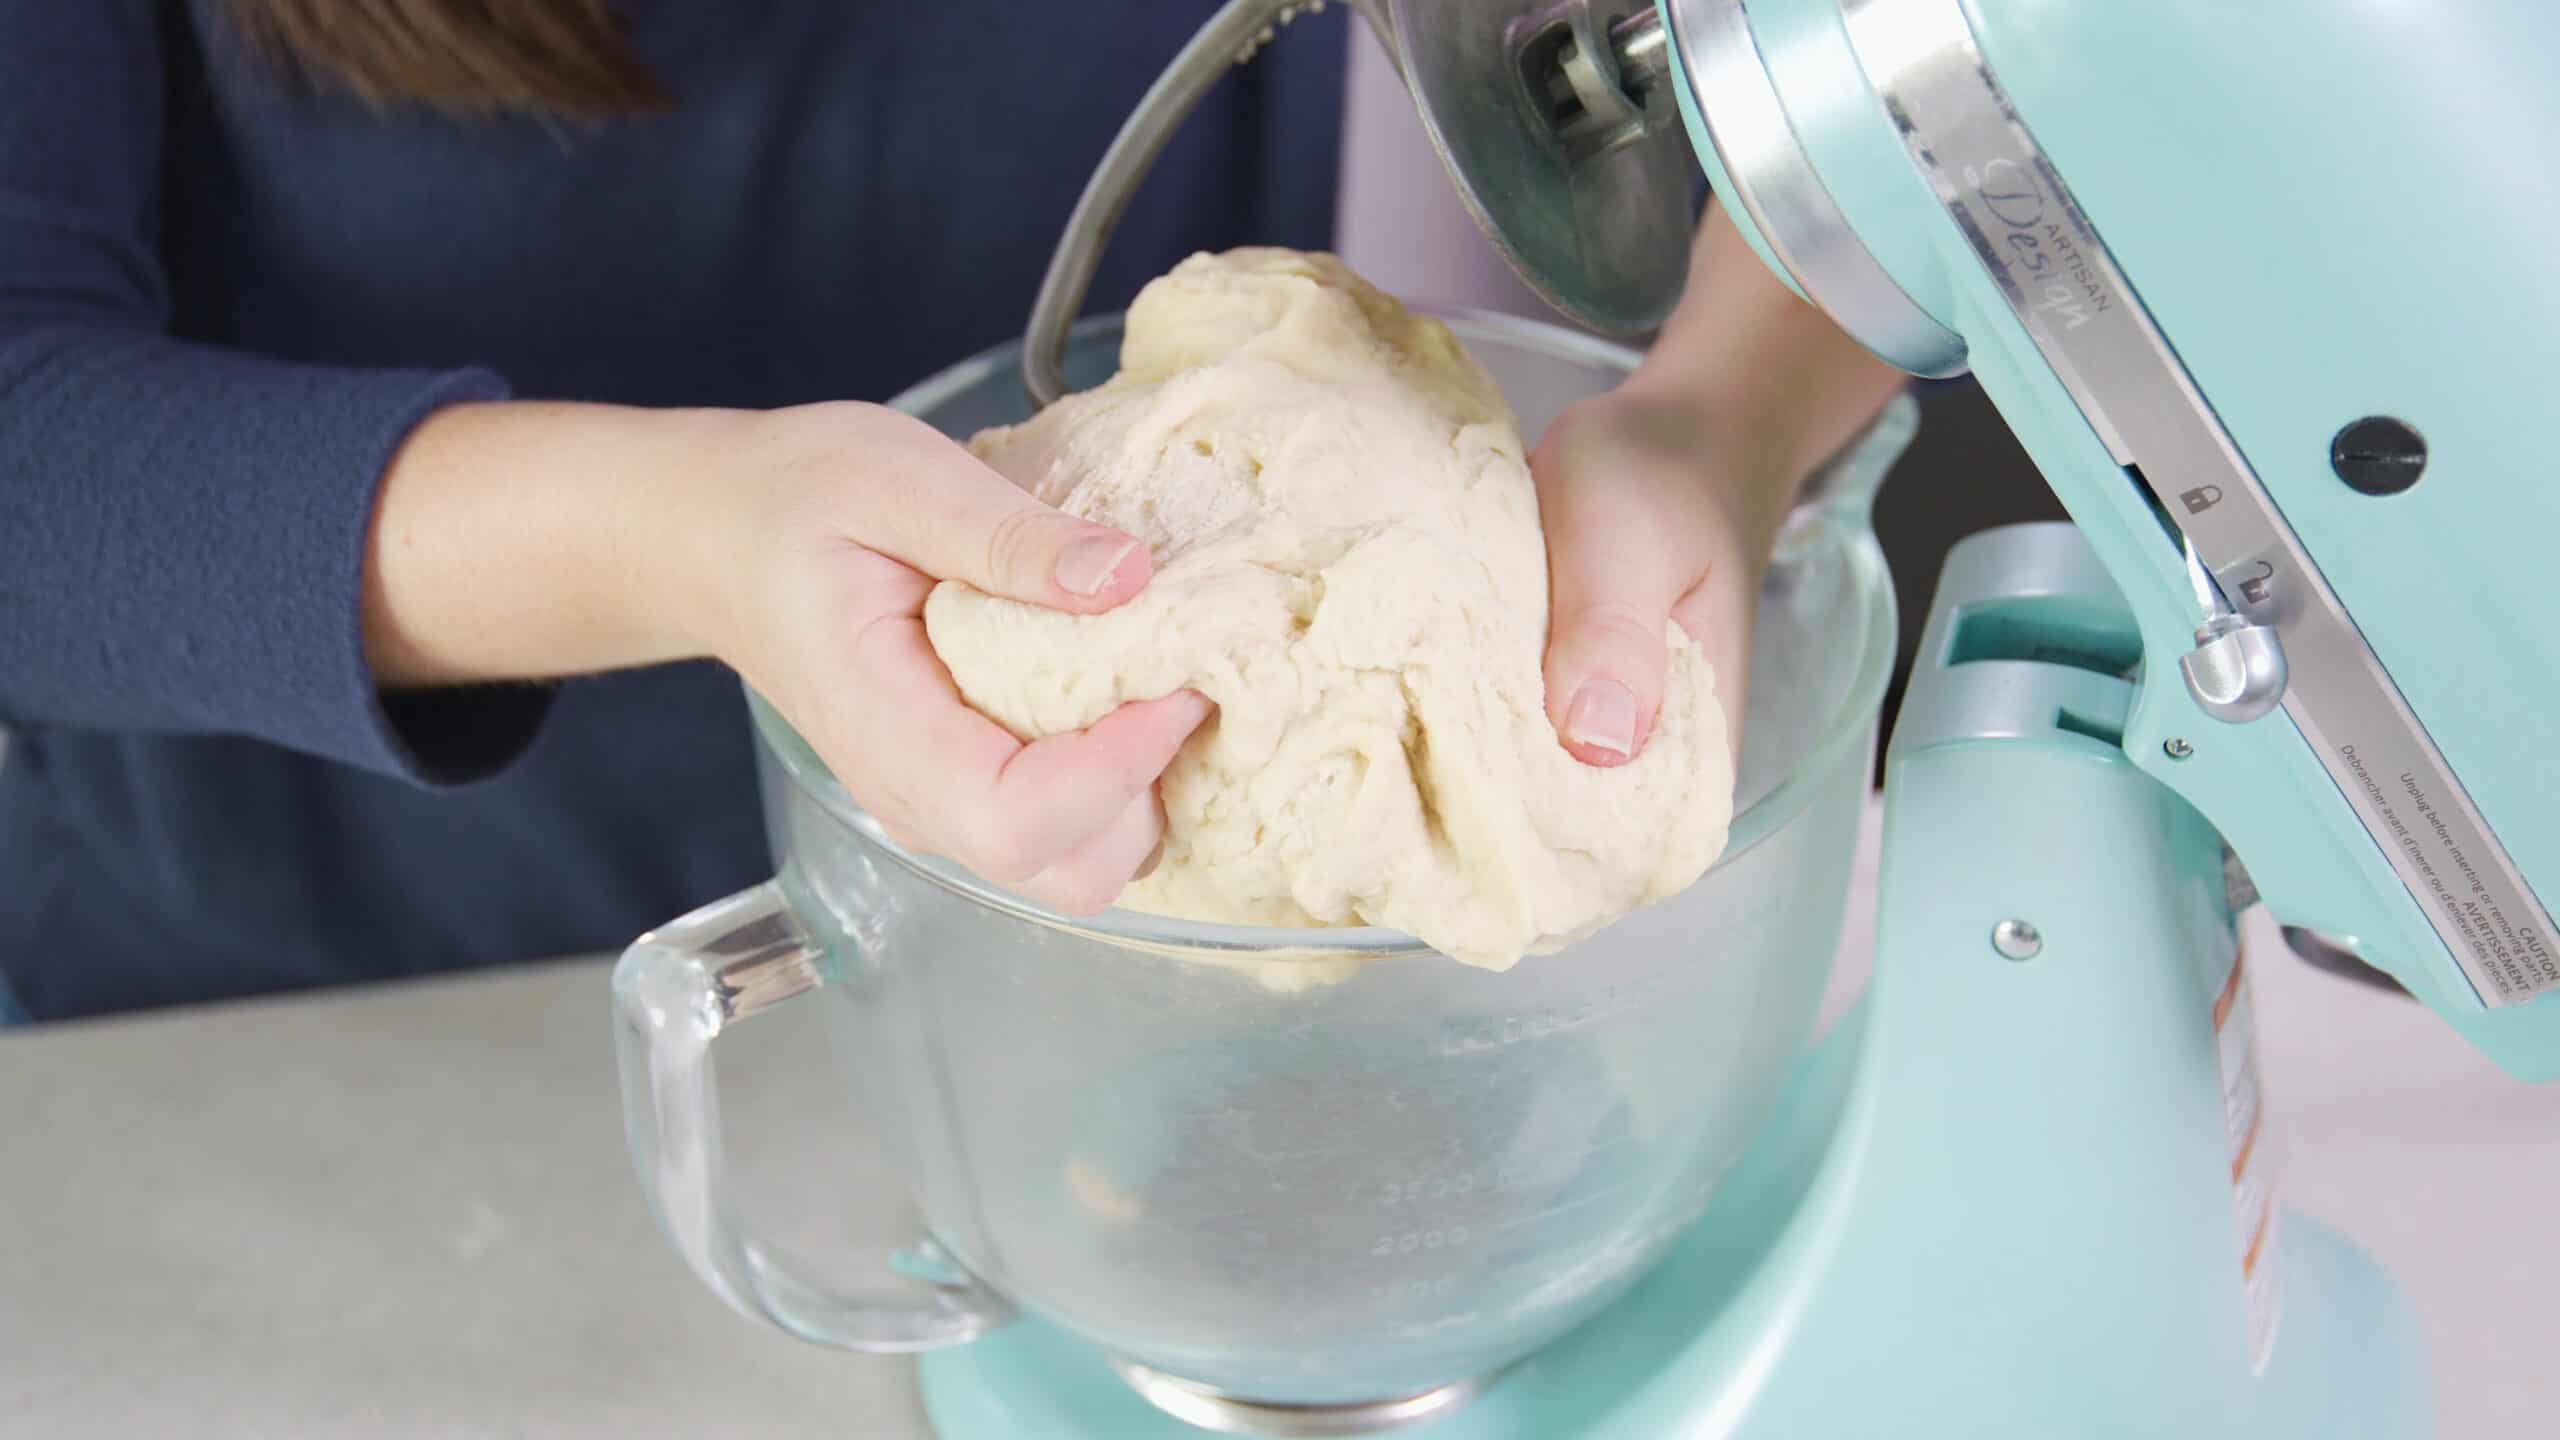 Angled view of clear glass mixing bowl attached to countertop mixer and the dough lifted to show texture of dough ready for rolling.